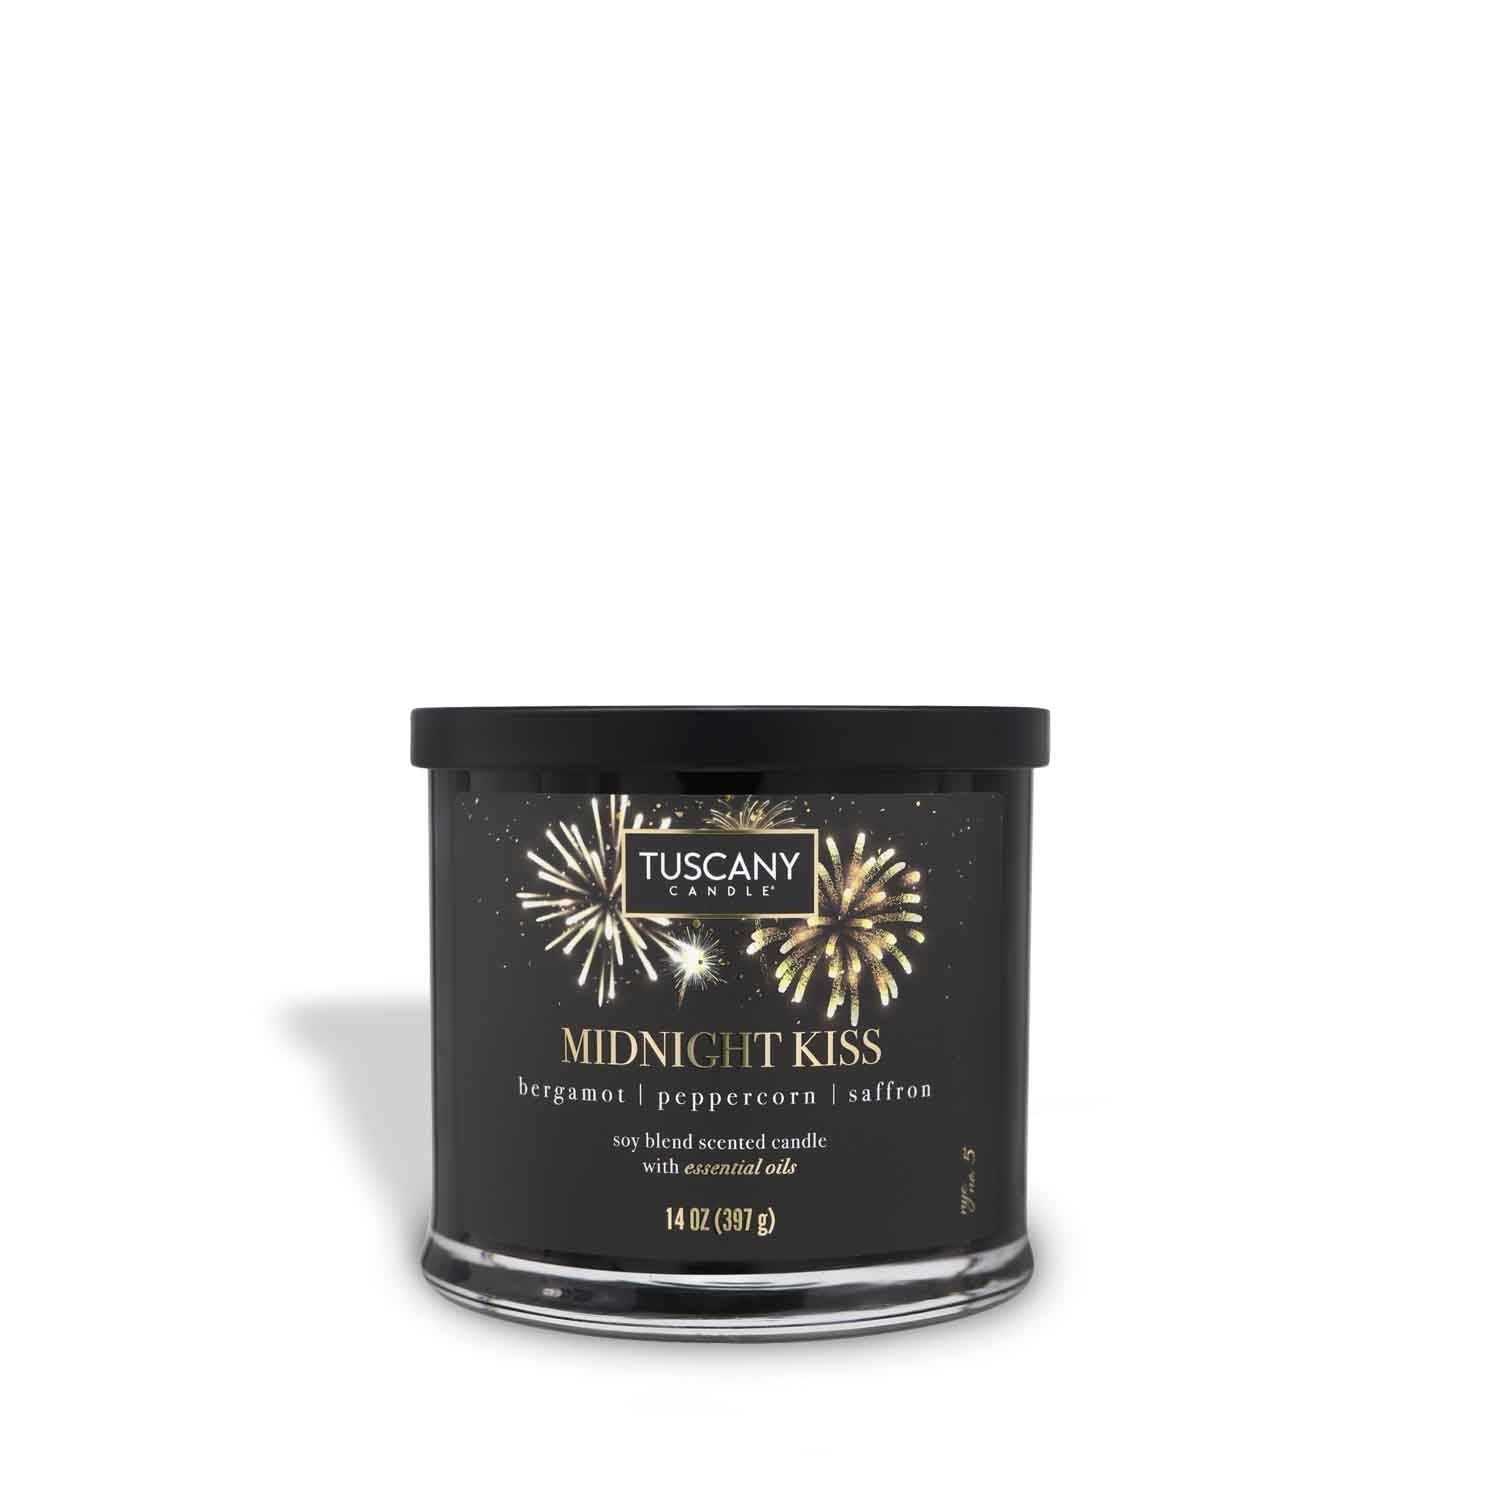 Elegant 'Midnight Kiss' candle in its glossy black jar, radiating the luxurious scents of Bergamot, Pink Peppercorn, and Saffron, complemented by a chic New Year's Eve label.